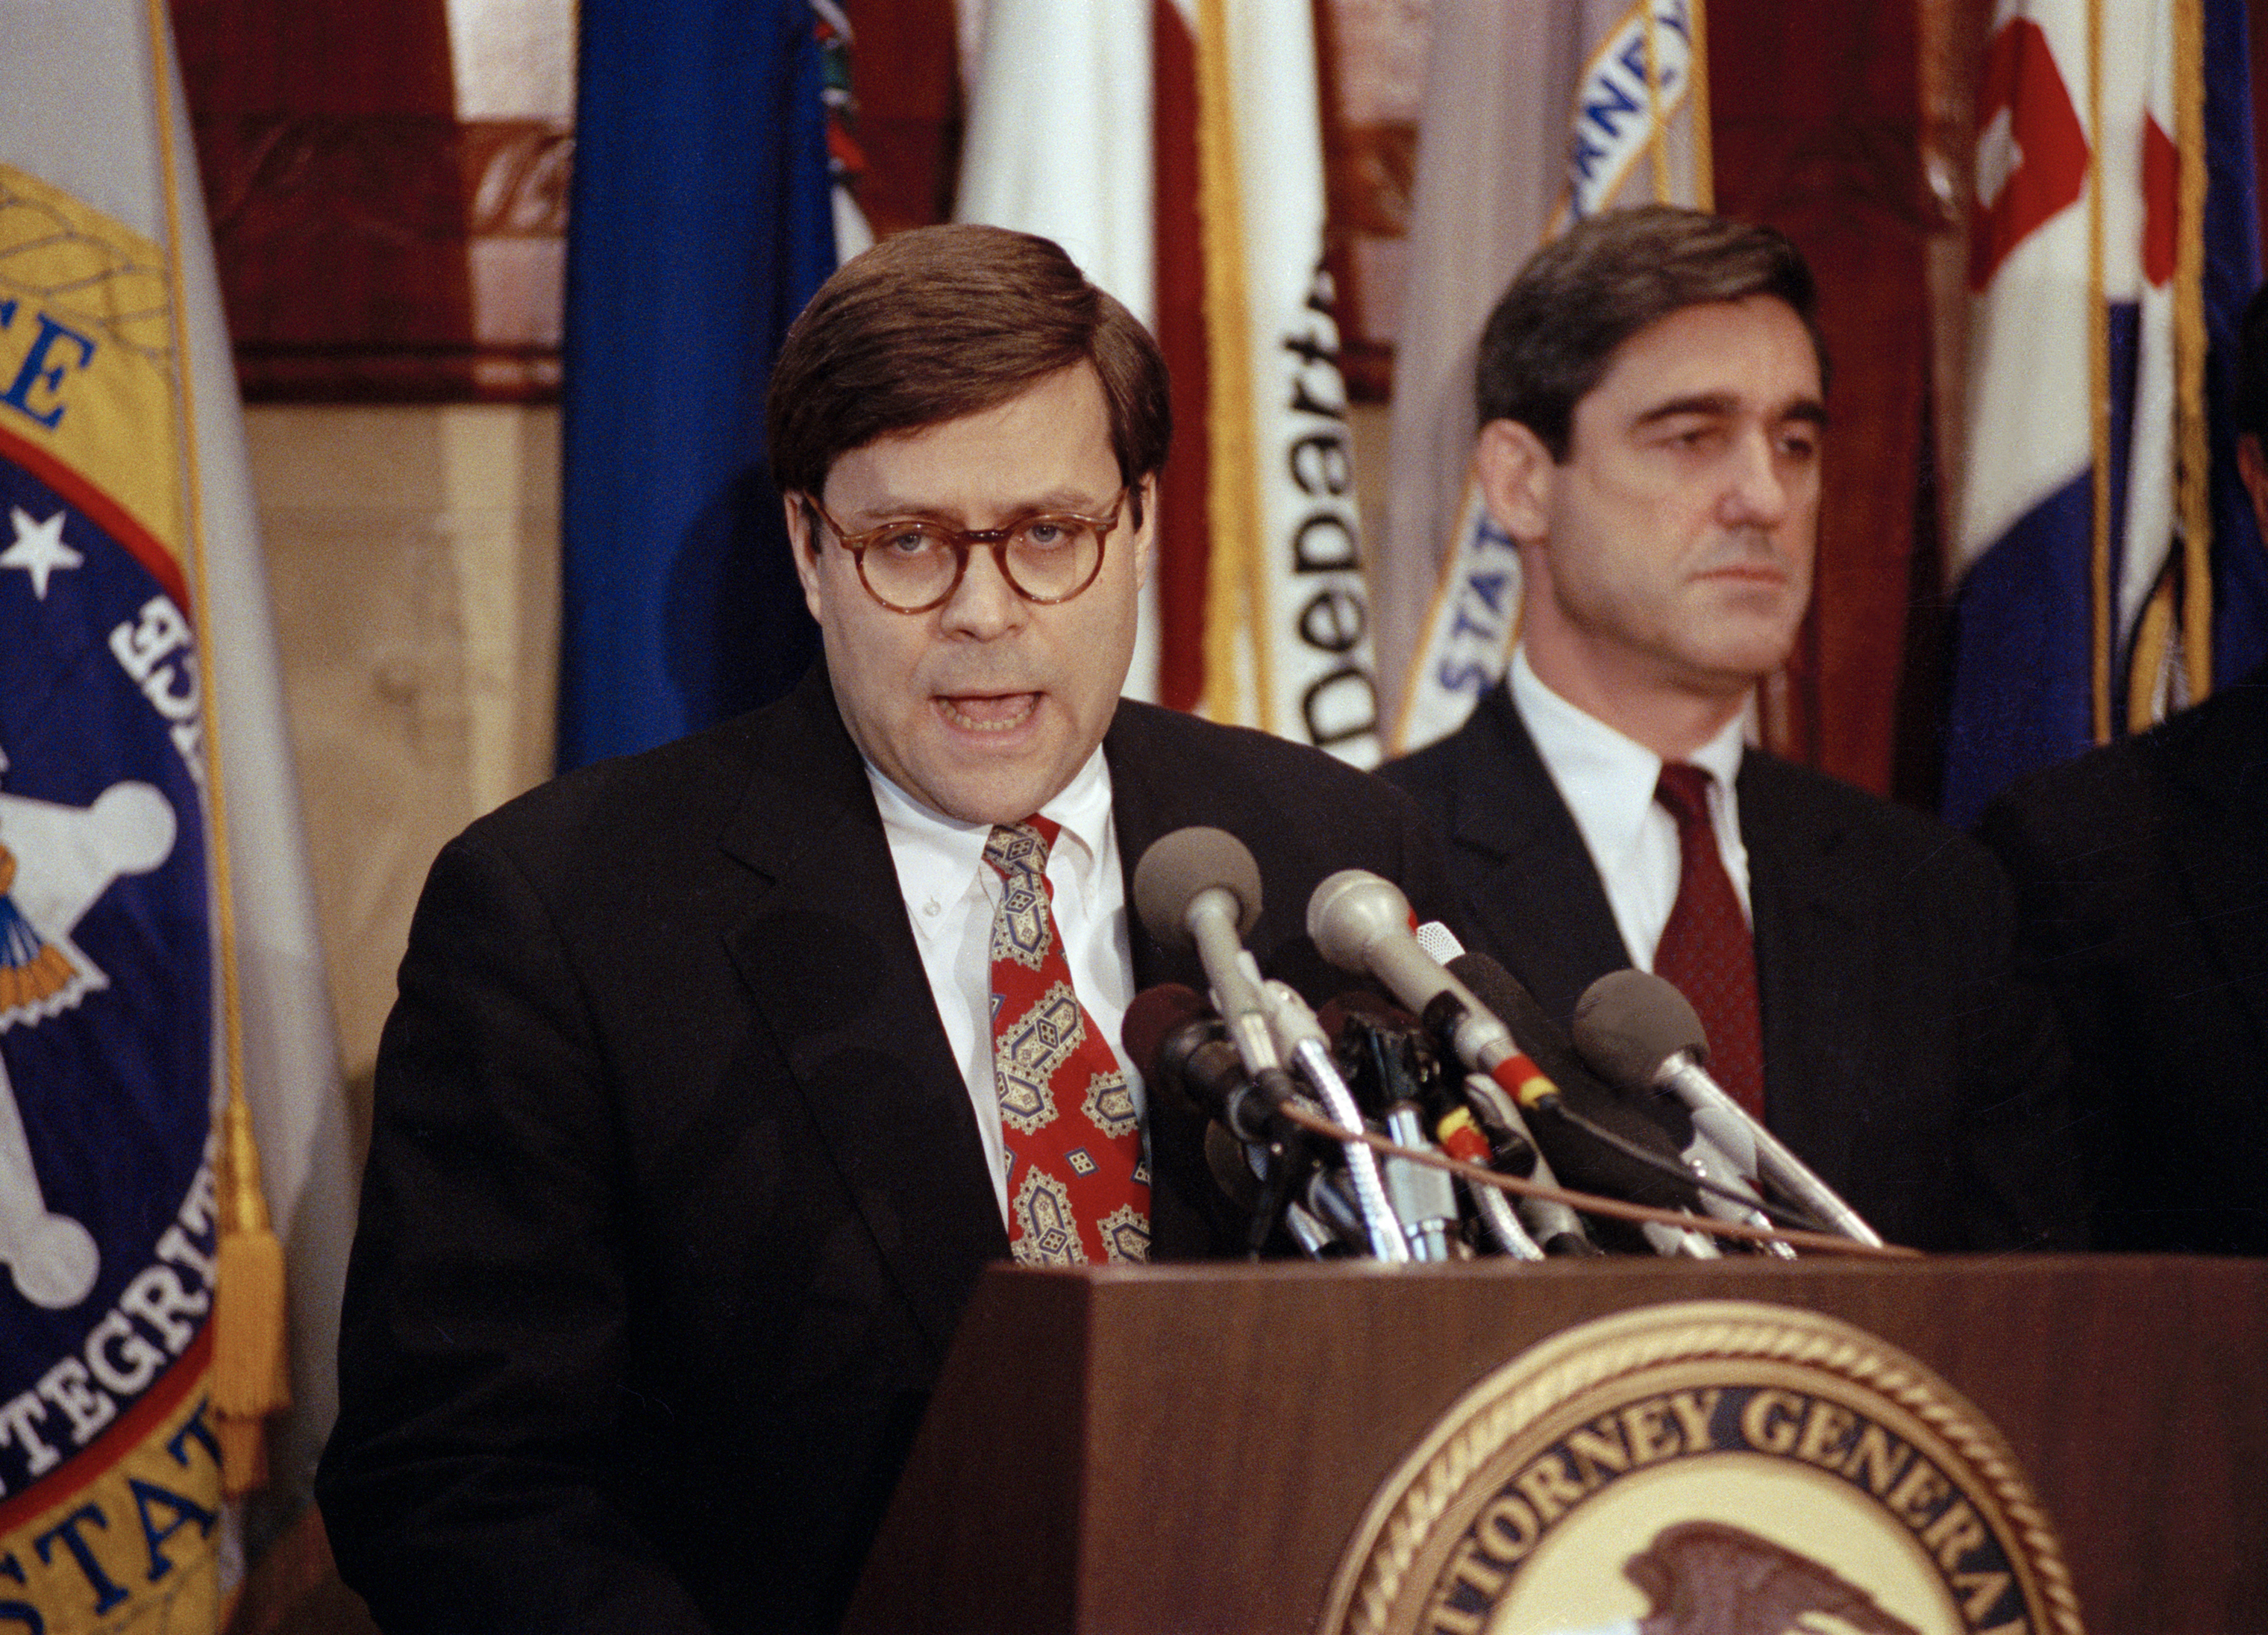 Attorney General William P. Barr speaks with reporters at a news conference in Washington, D.C., on Dec. 19, 1991. Assistant Attorney General Robert Mueller stands on his right. (Barry Thumma—AP)